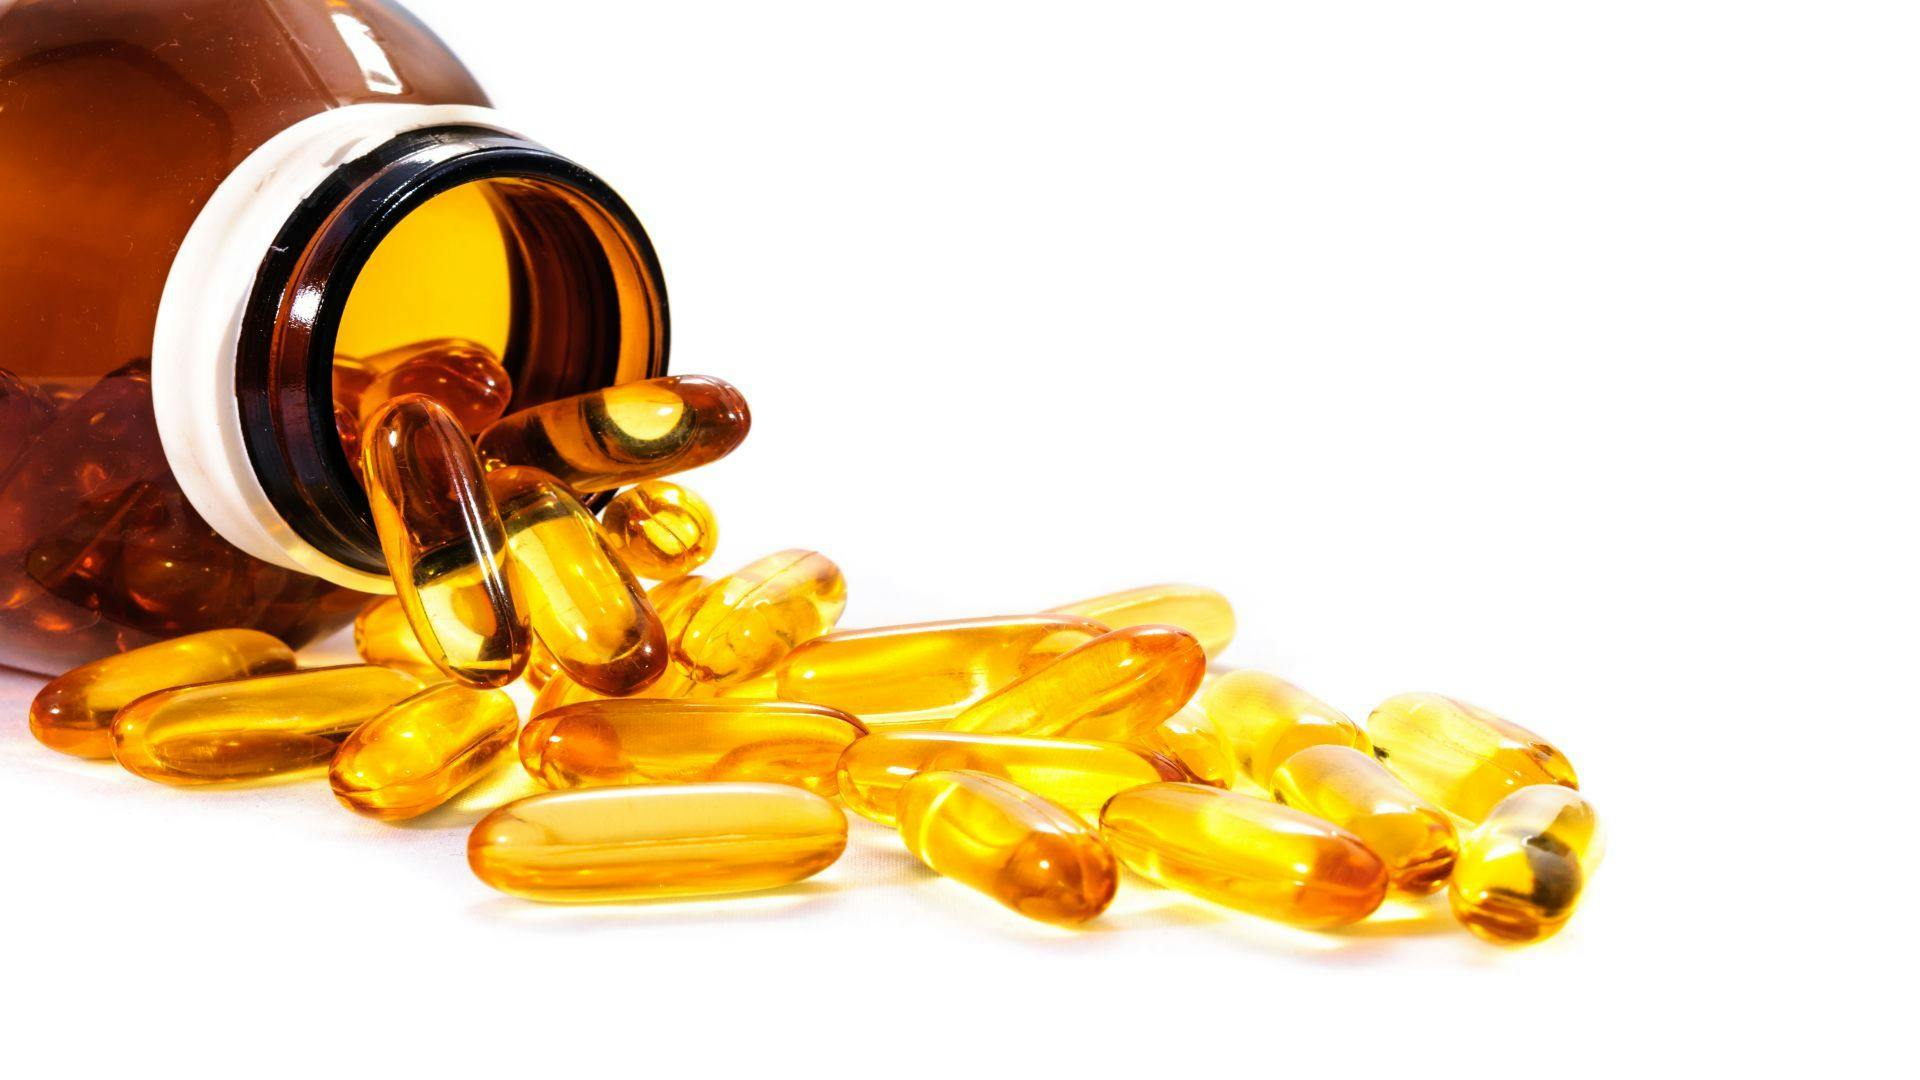 High-Dose Vitamin D Does Not Reduce Risk of Common Cold Among Young Children